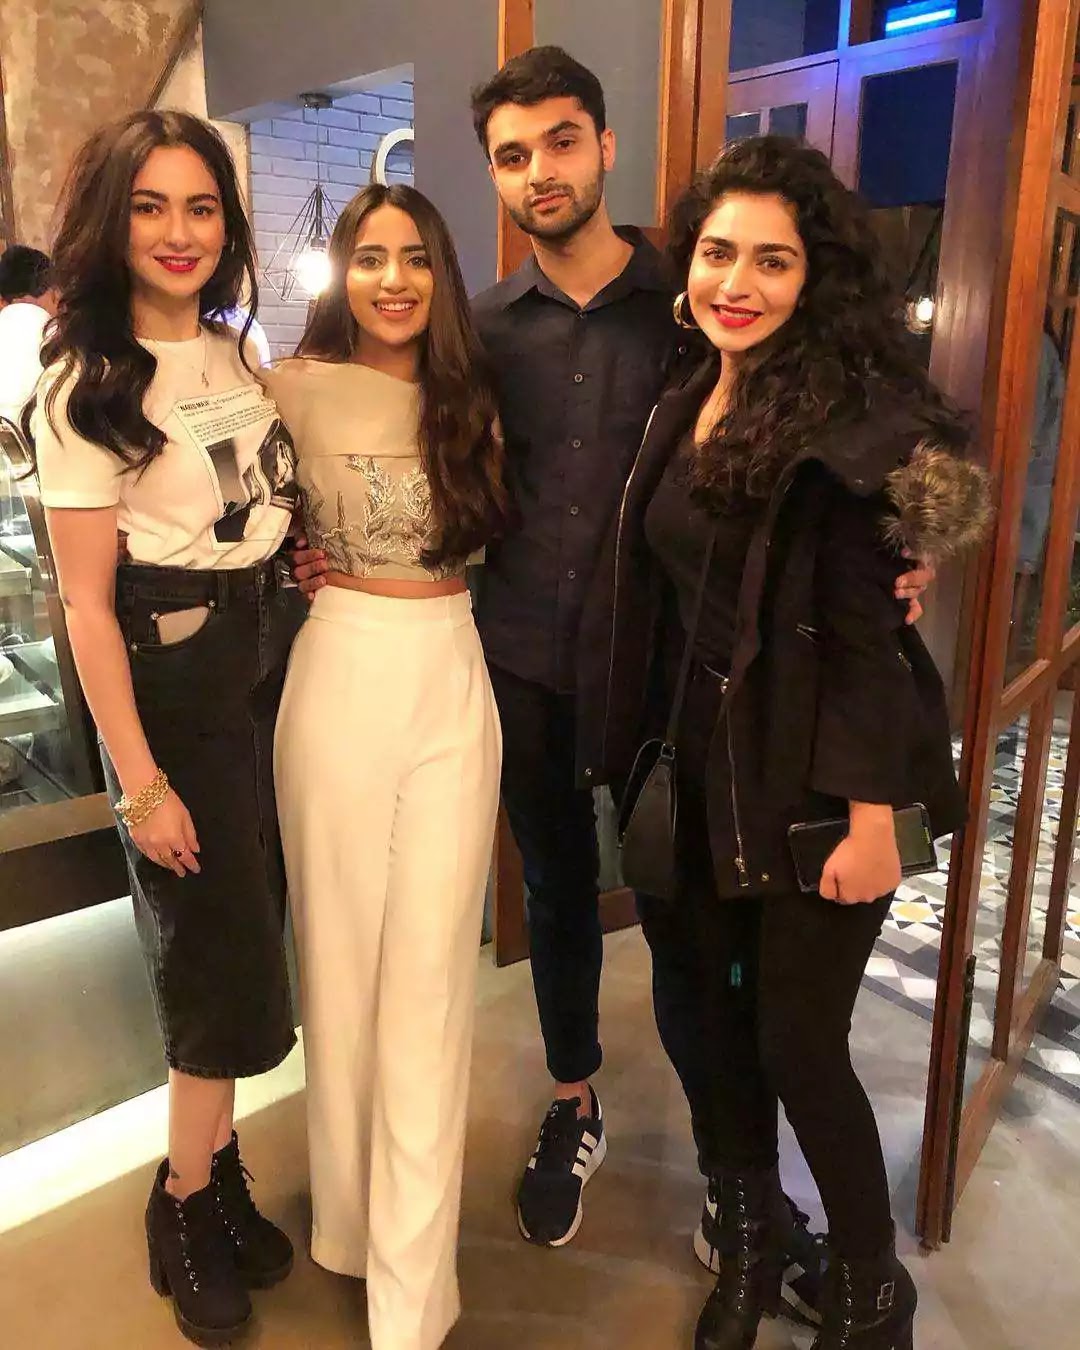 Saboor Ali Host The Grand Party At Home With Showbiz Friends